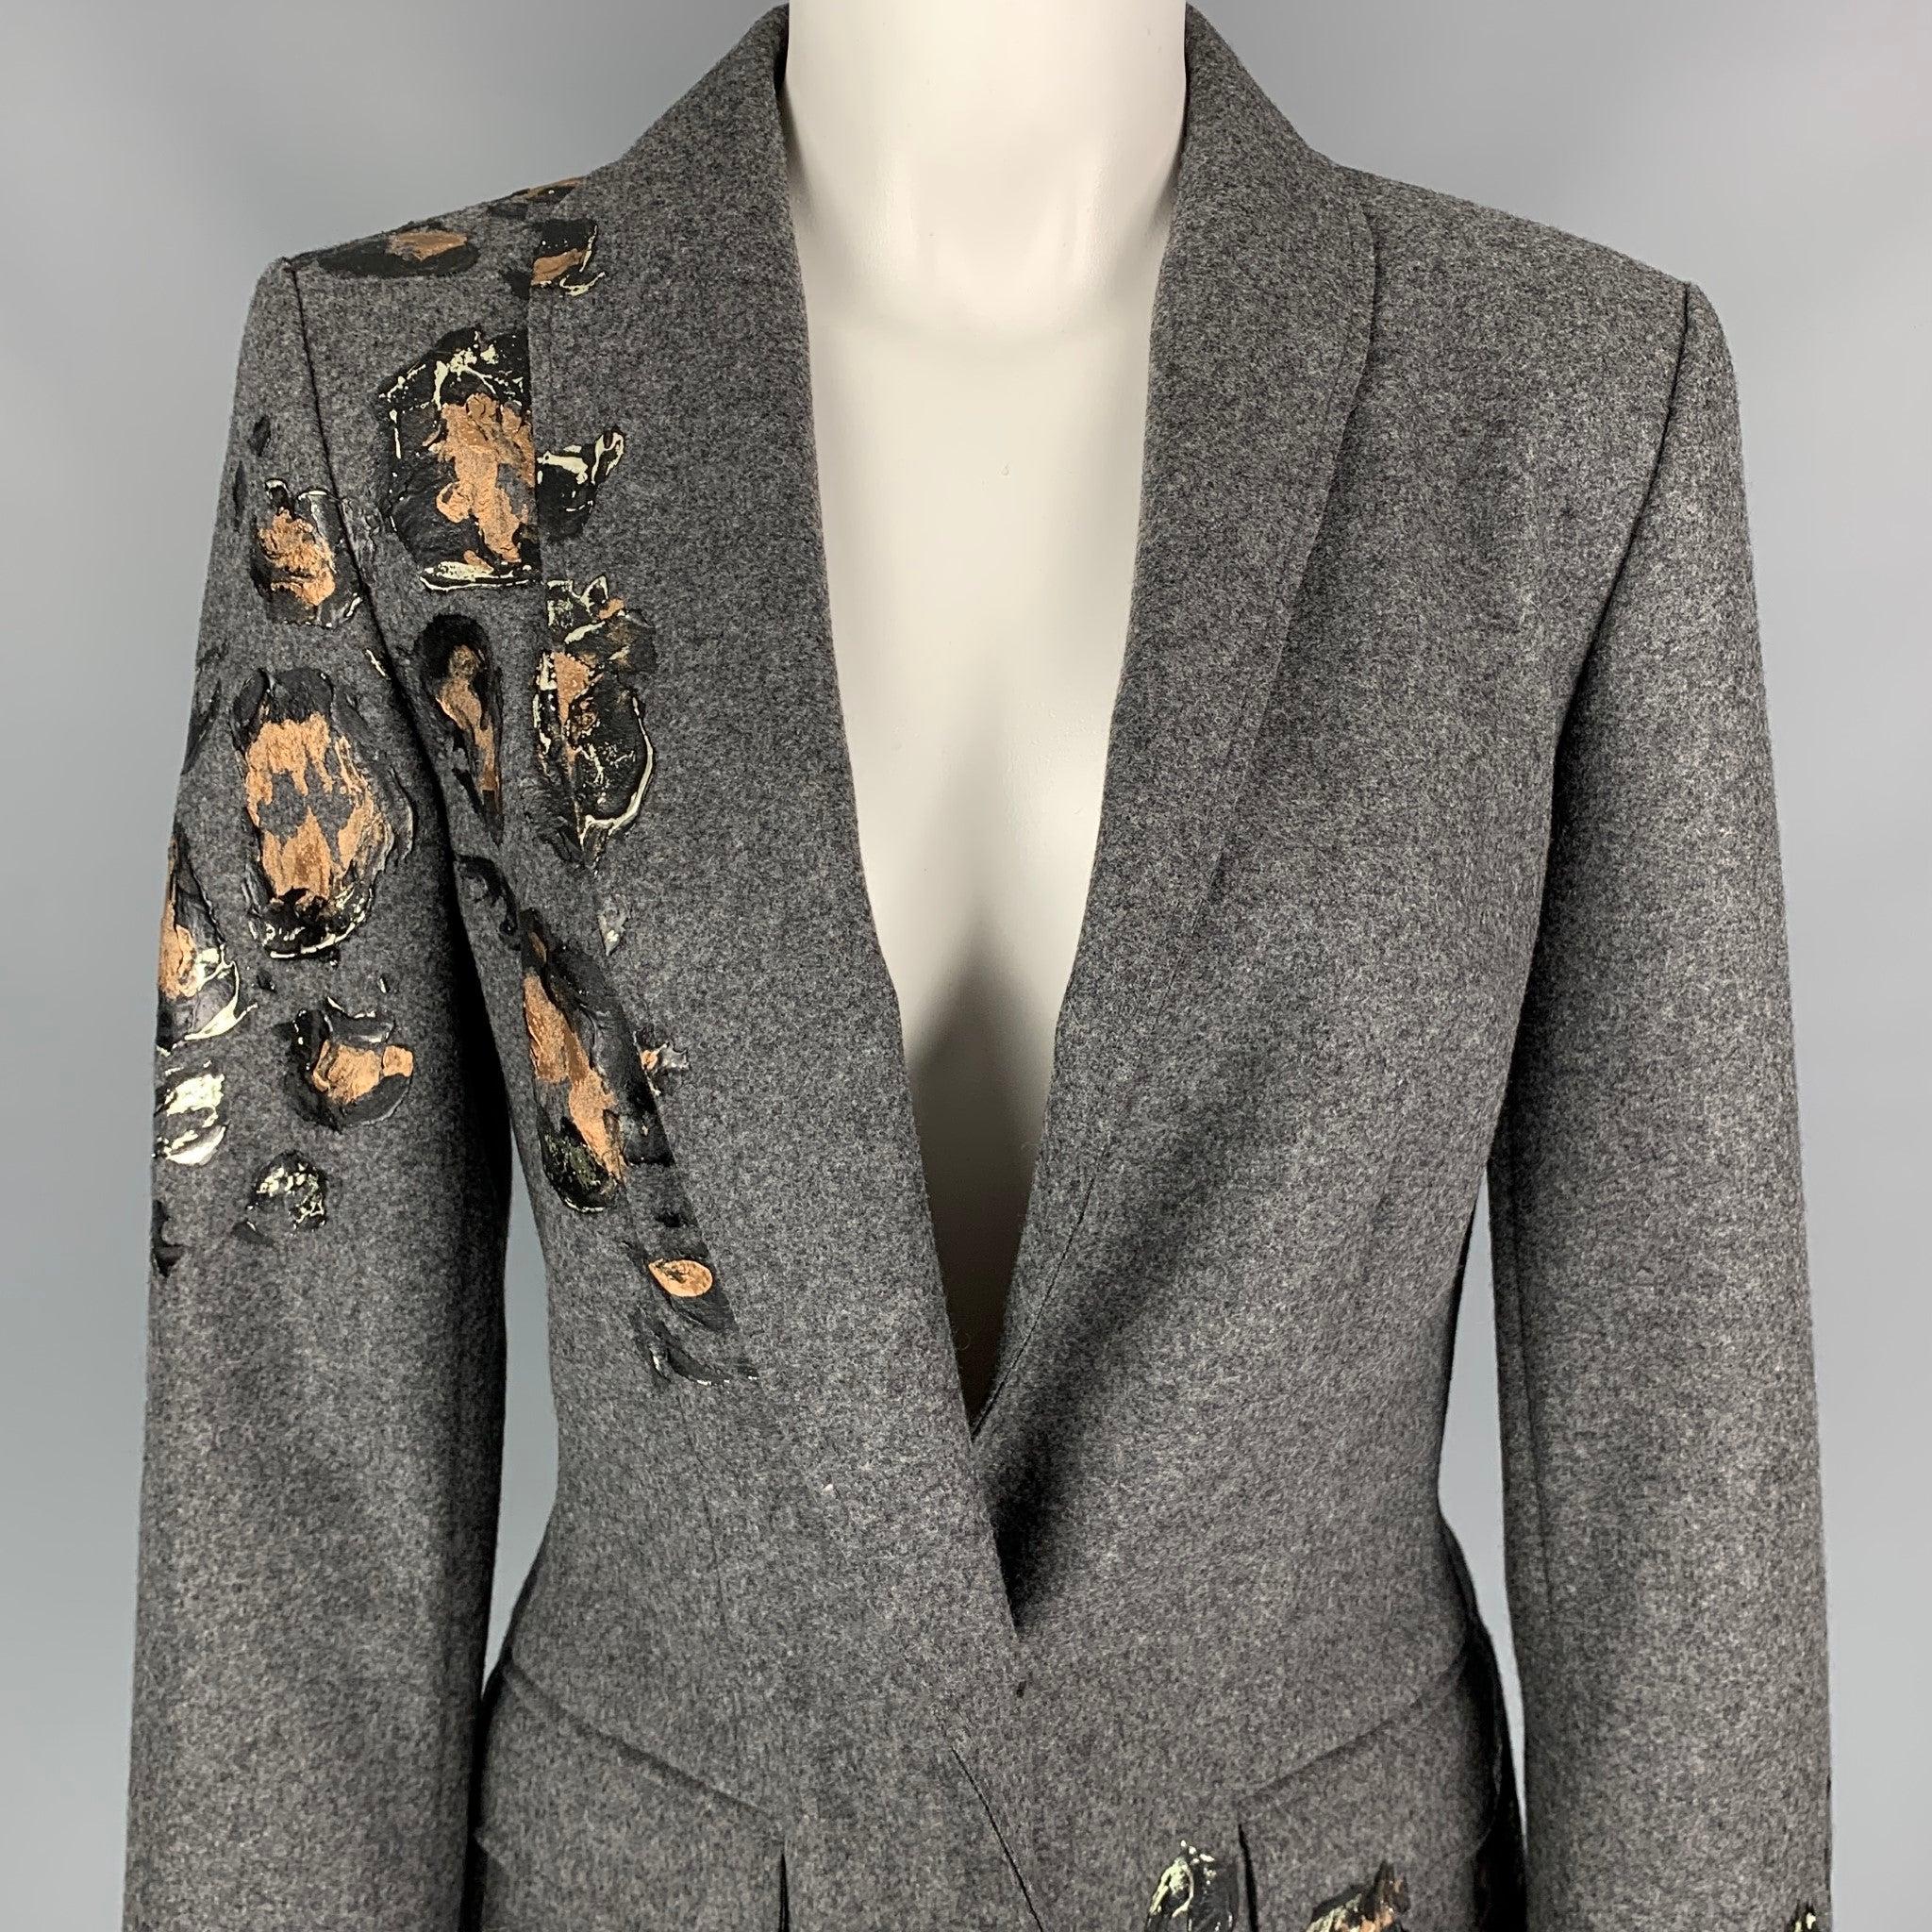 ESCADA jacket comes in a grey virgin wool featuring a shawl collar, paint splattered details, flap pocket, and a single button closure.
New With Tags.
 

Marked:   36 

Measurements: 
 
Shoulder: 16 inches  Bust: 36 inches  Sleeve: 25.5 inches 